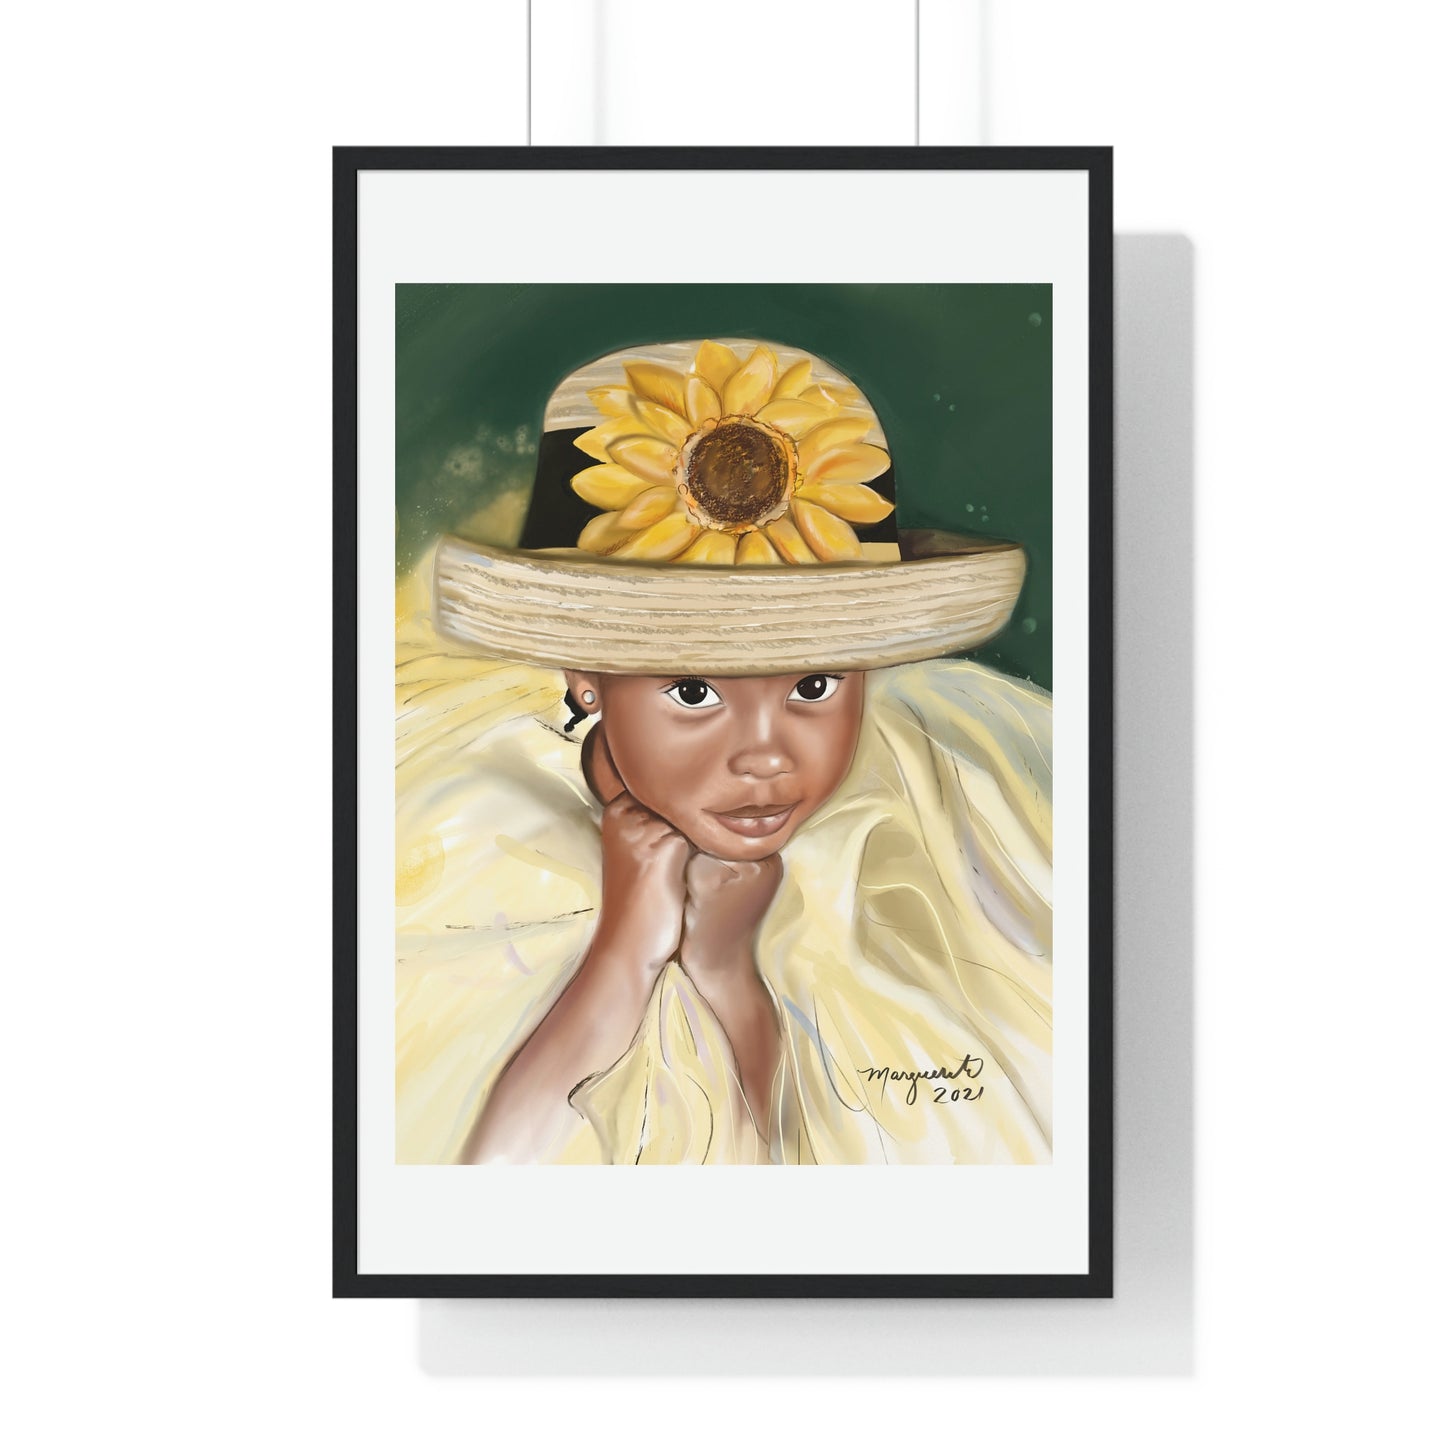 Girl with Straw hat - Wall Art print